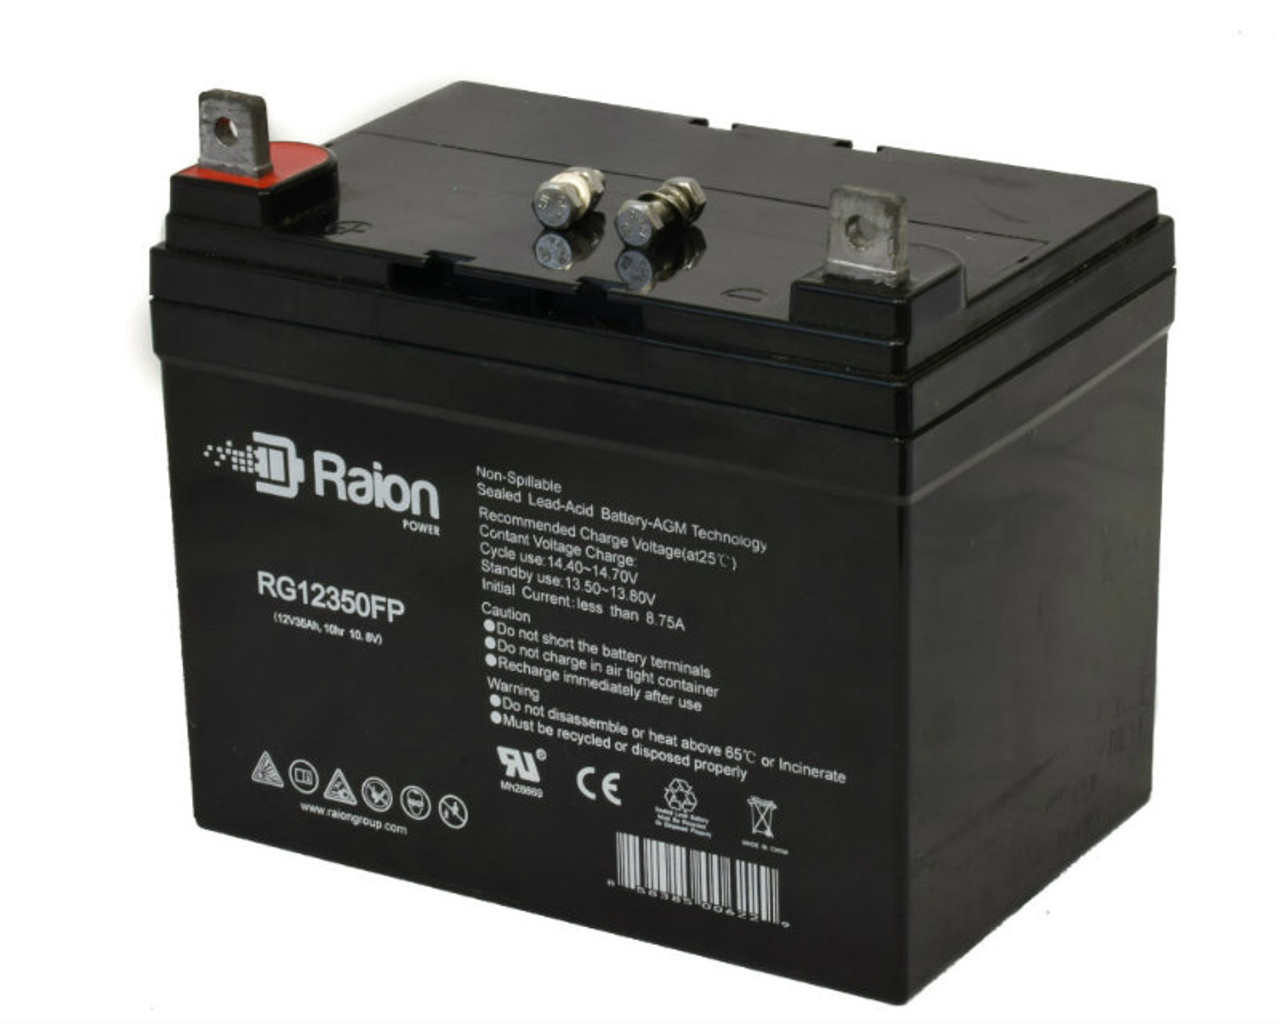 Raion Power Replacement 12V 35Ah RG12350FP Mobility Scooter Battery for Everest & Jennings Wheelchairs Quest